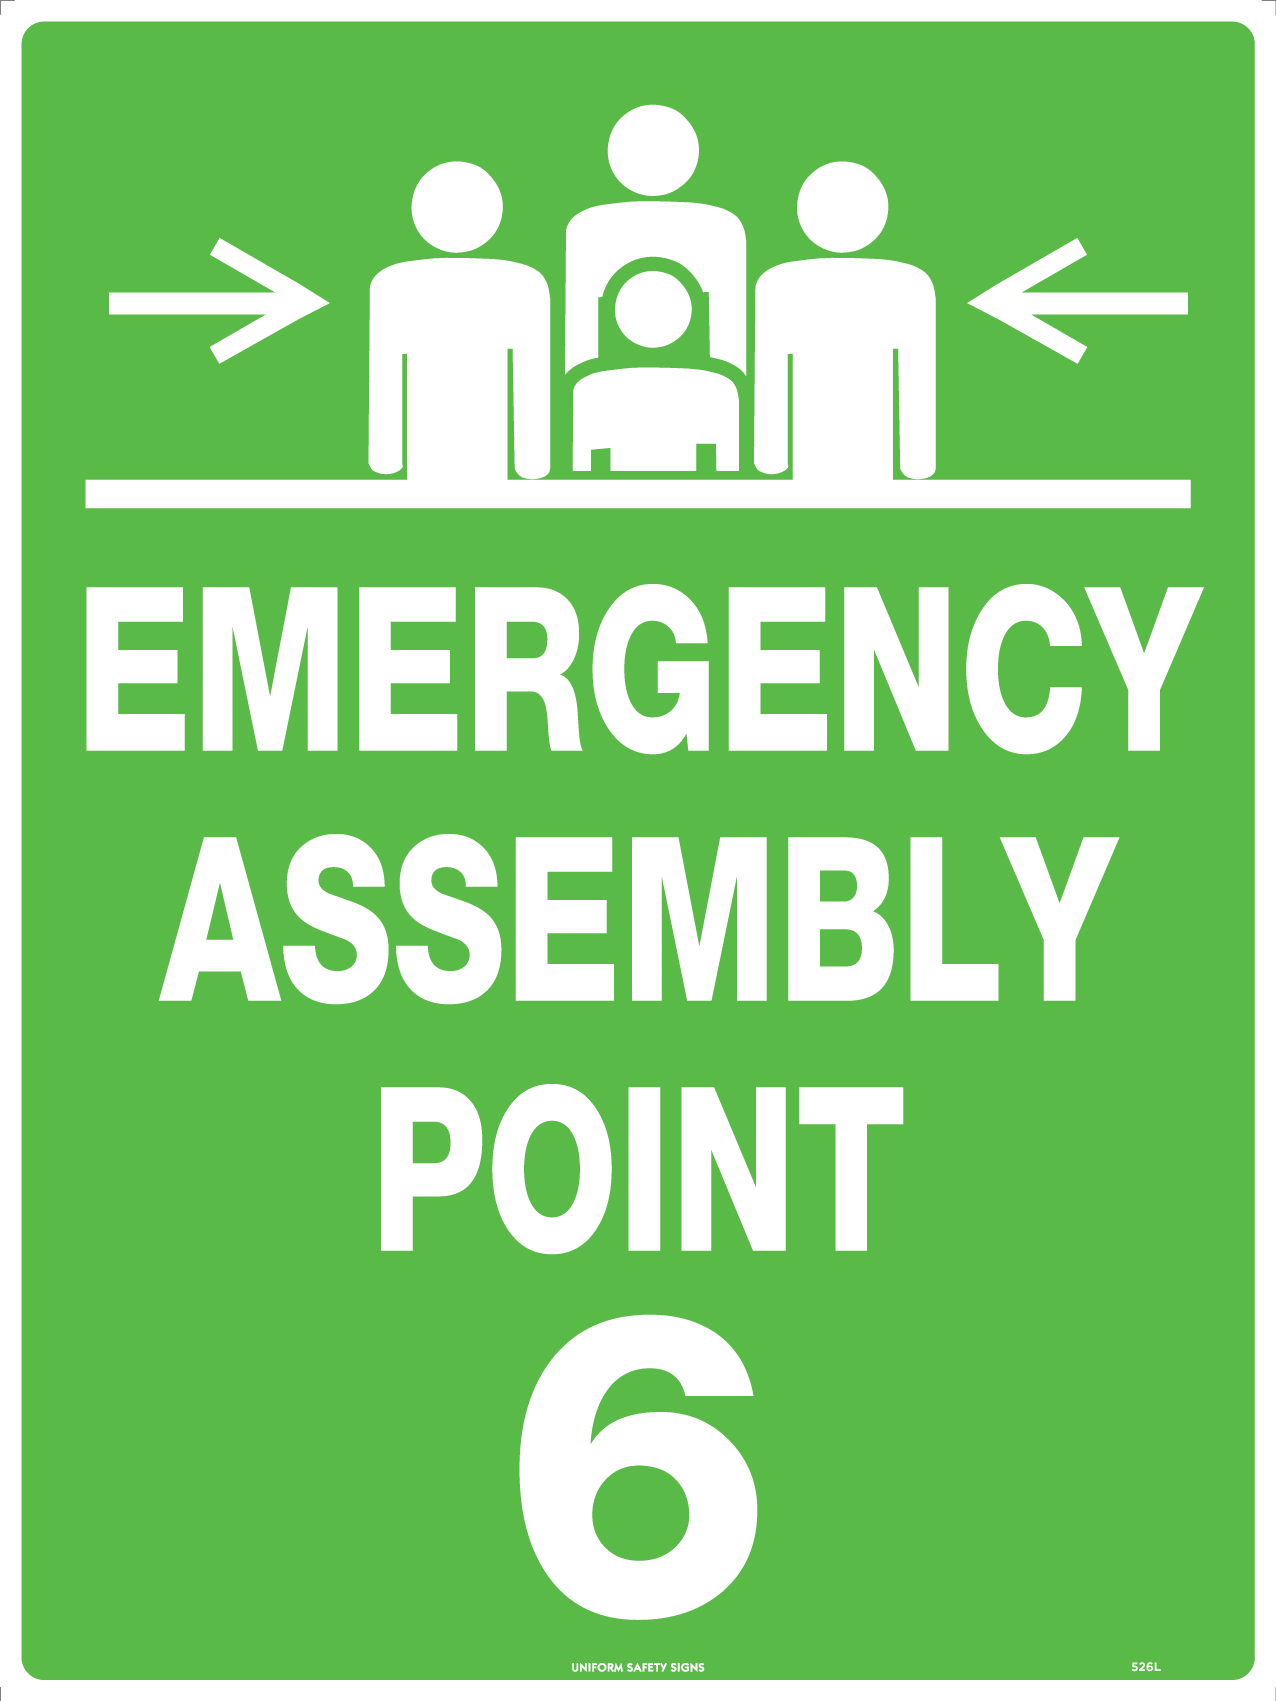 UNIFORM SAFETY 600X450MM METAL EMERGENCY ASSEMBLY POINT 6 